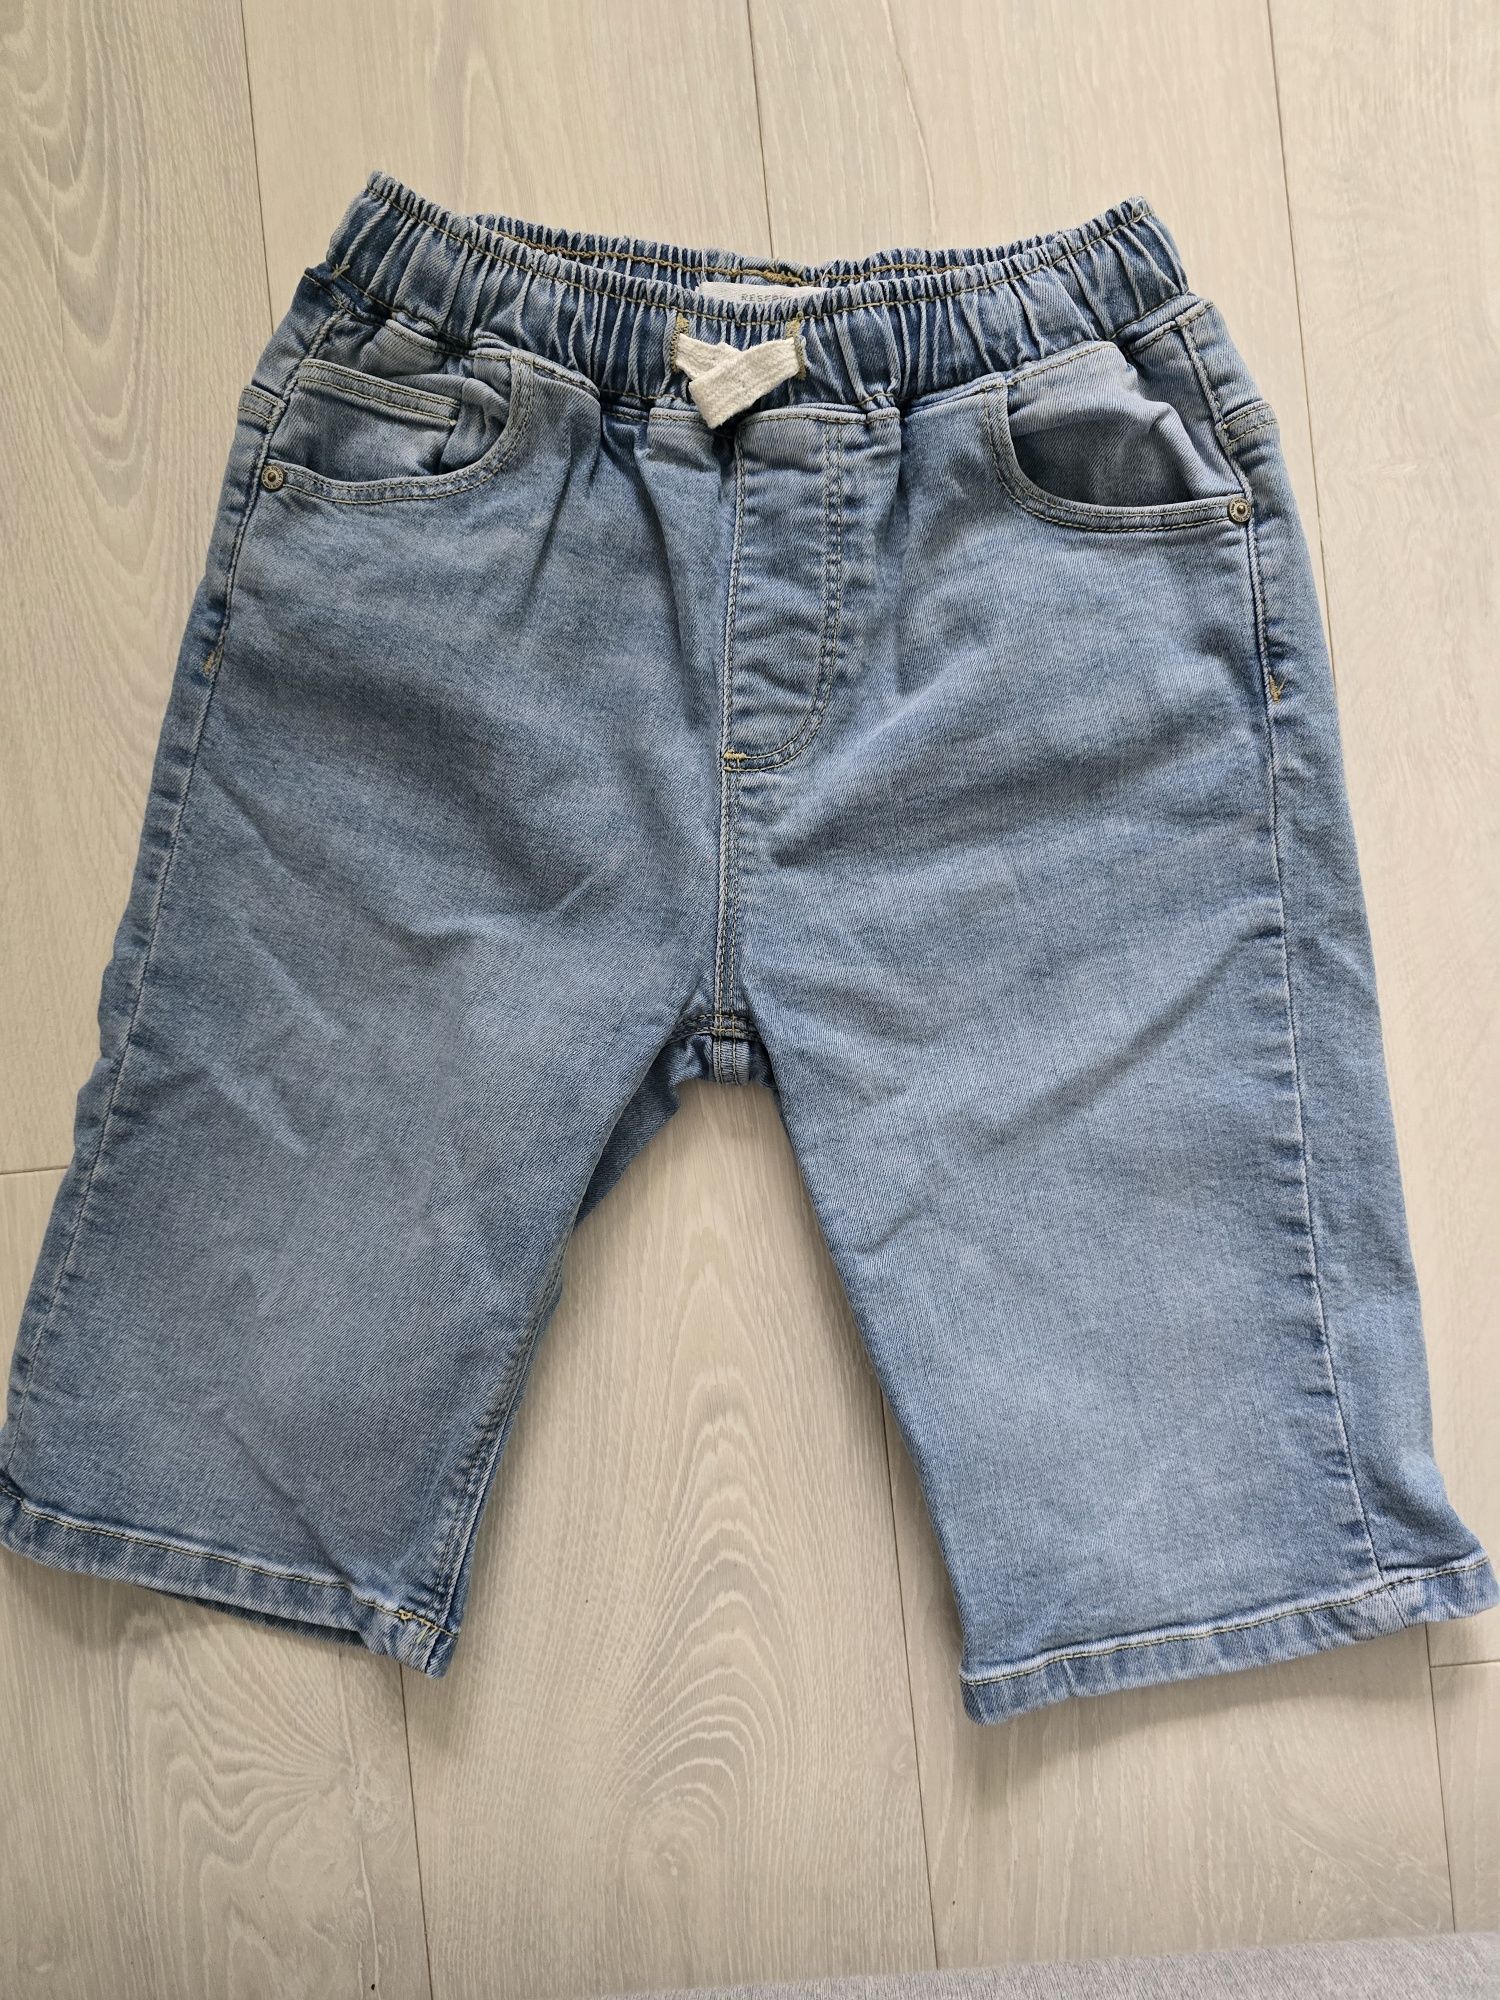 Spodenki jeans RESERVED r. 146